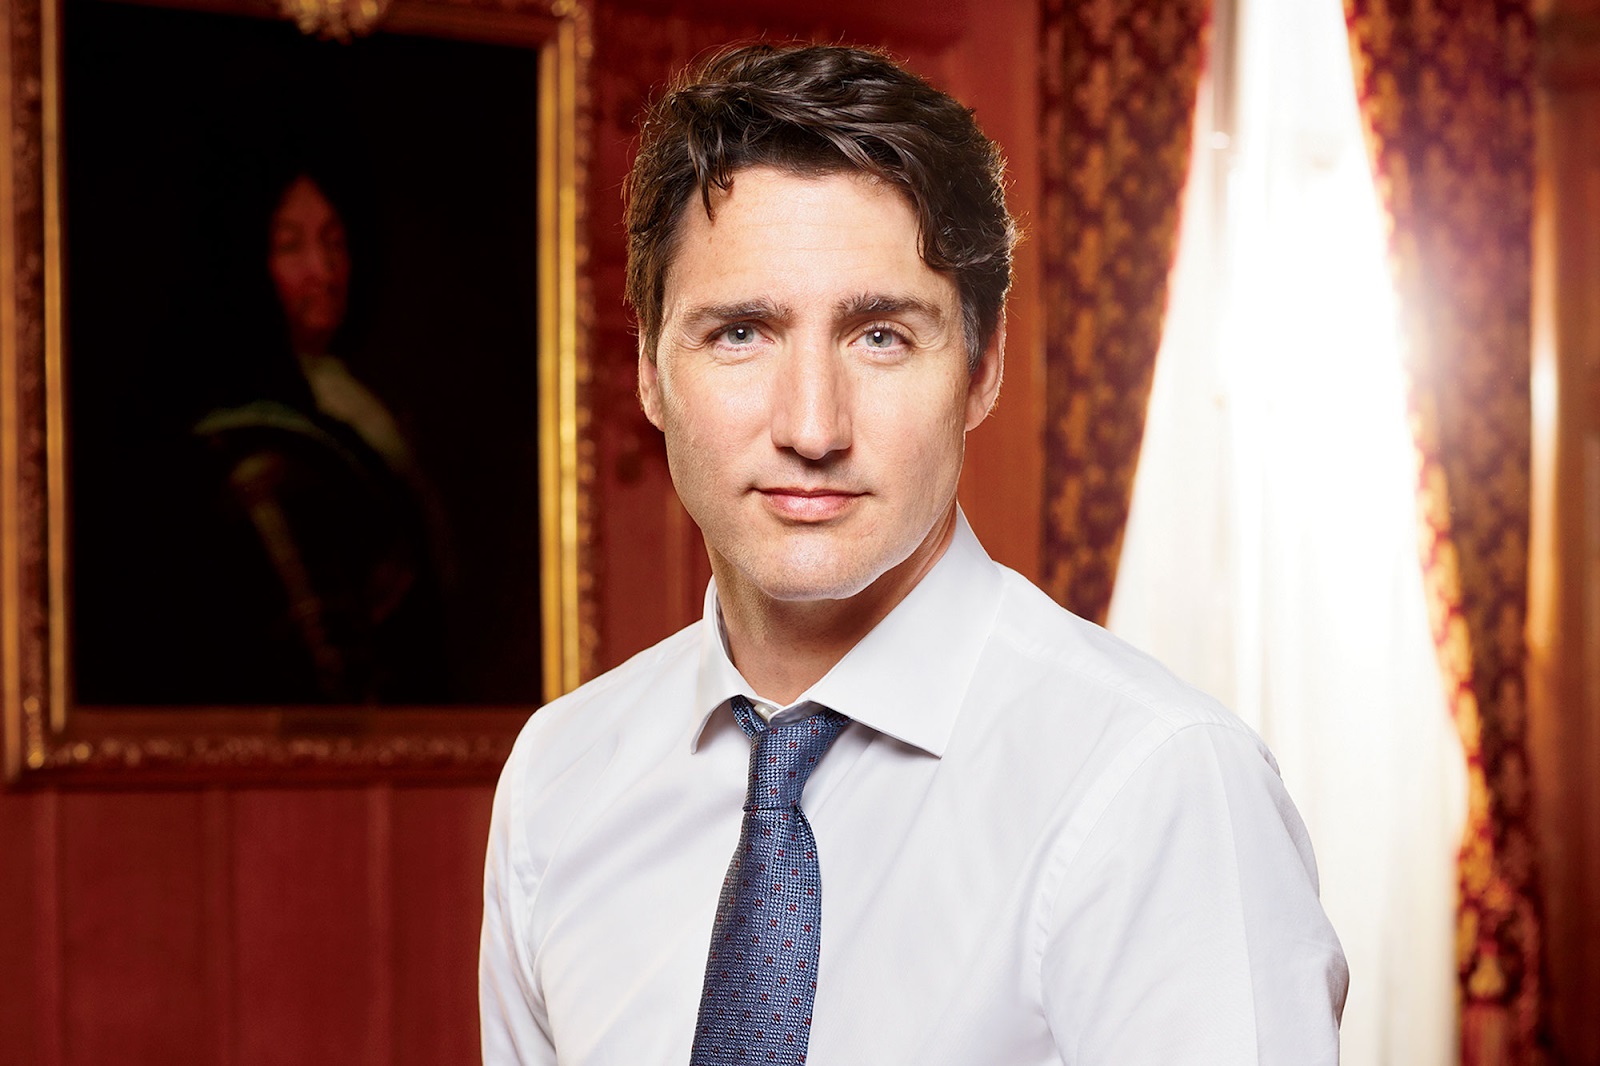 trudeau-s-racist-photos-are-shocking-but-not-entirely-surprising-vogue